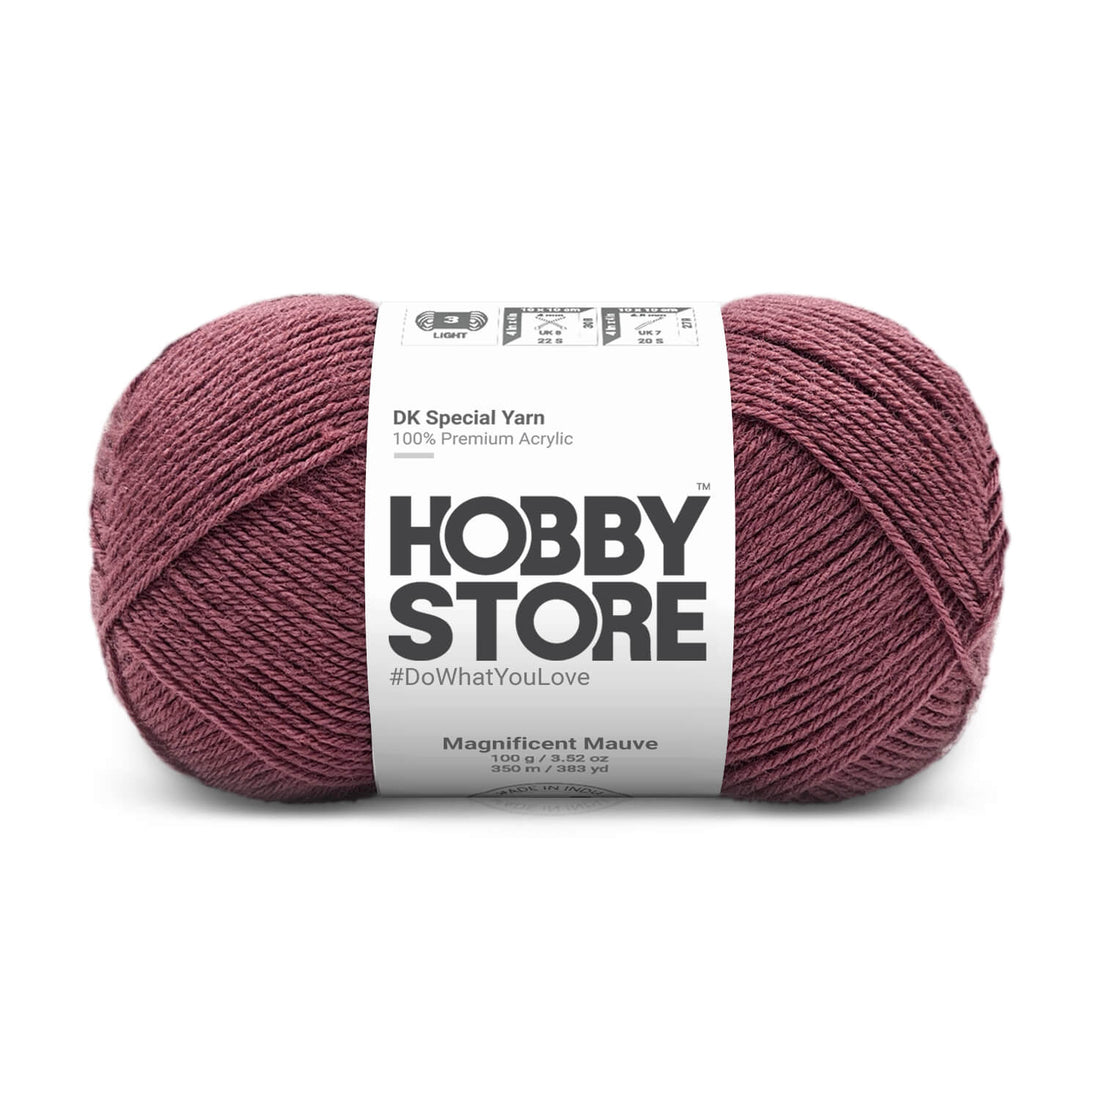 Hobby Store DK Special Yarn - Magnificent Mauve 5027